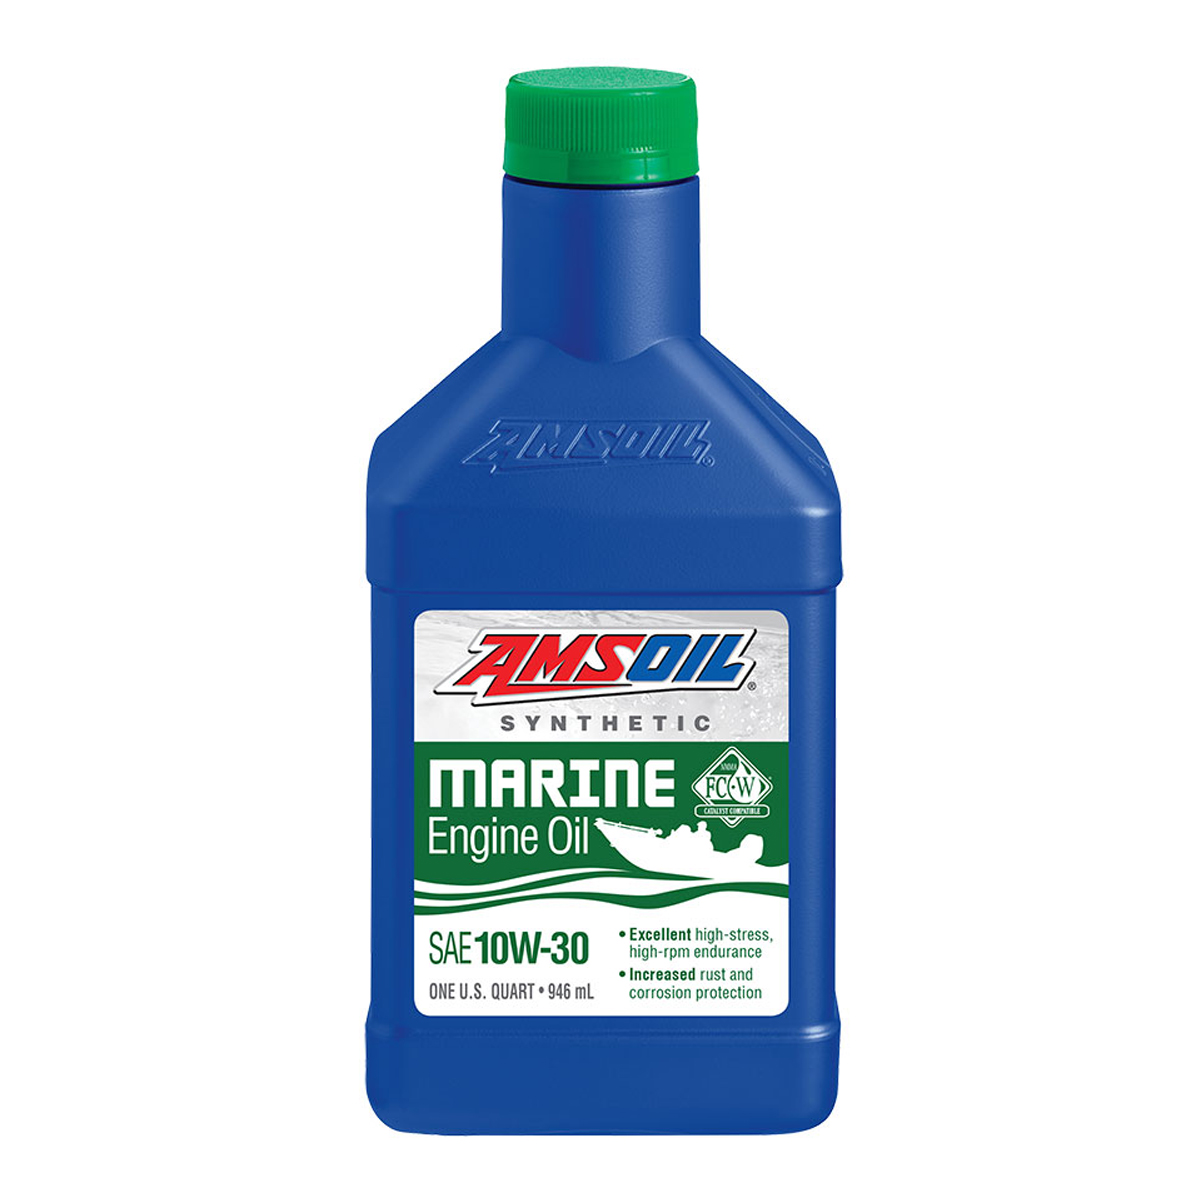 Ford Maverick Use new Hybrid-specific 0w-20 oil? (And new oil filter is available) amsoil marine oil